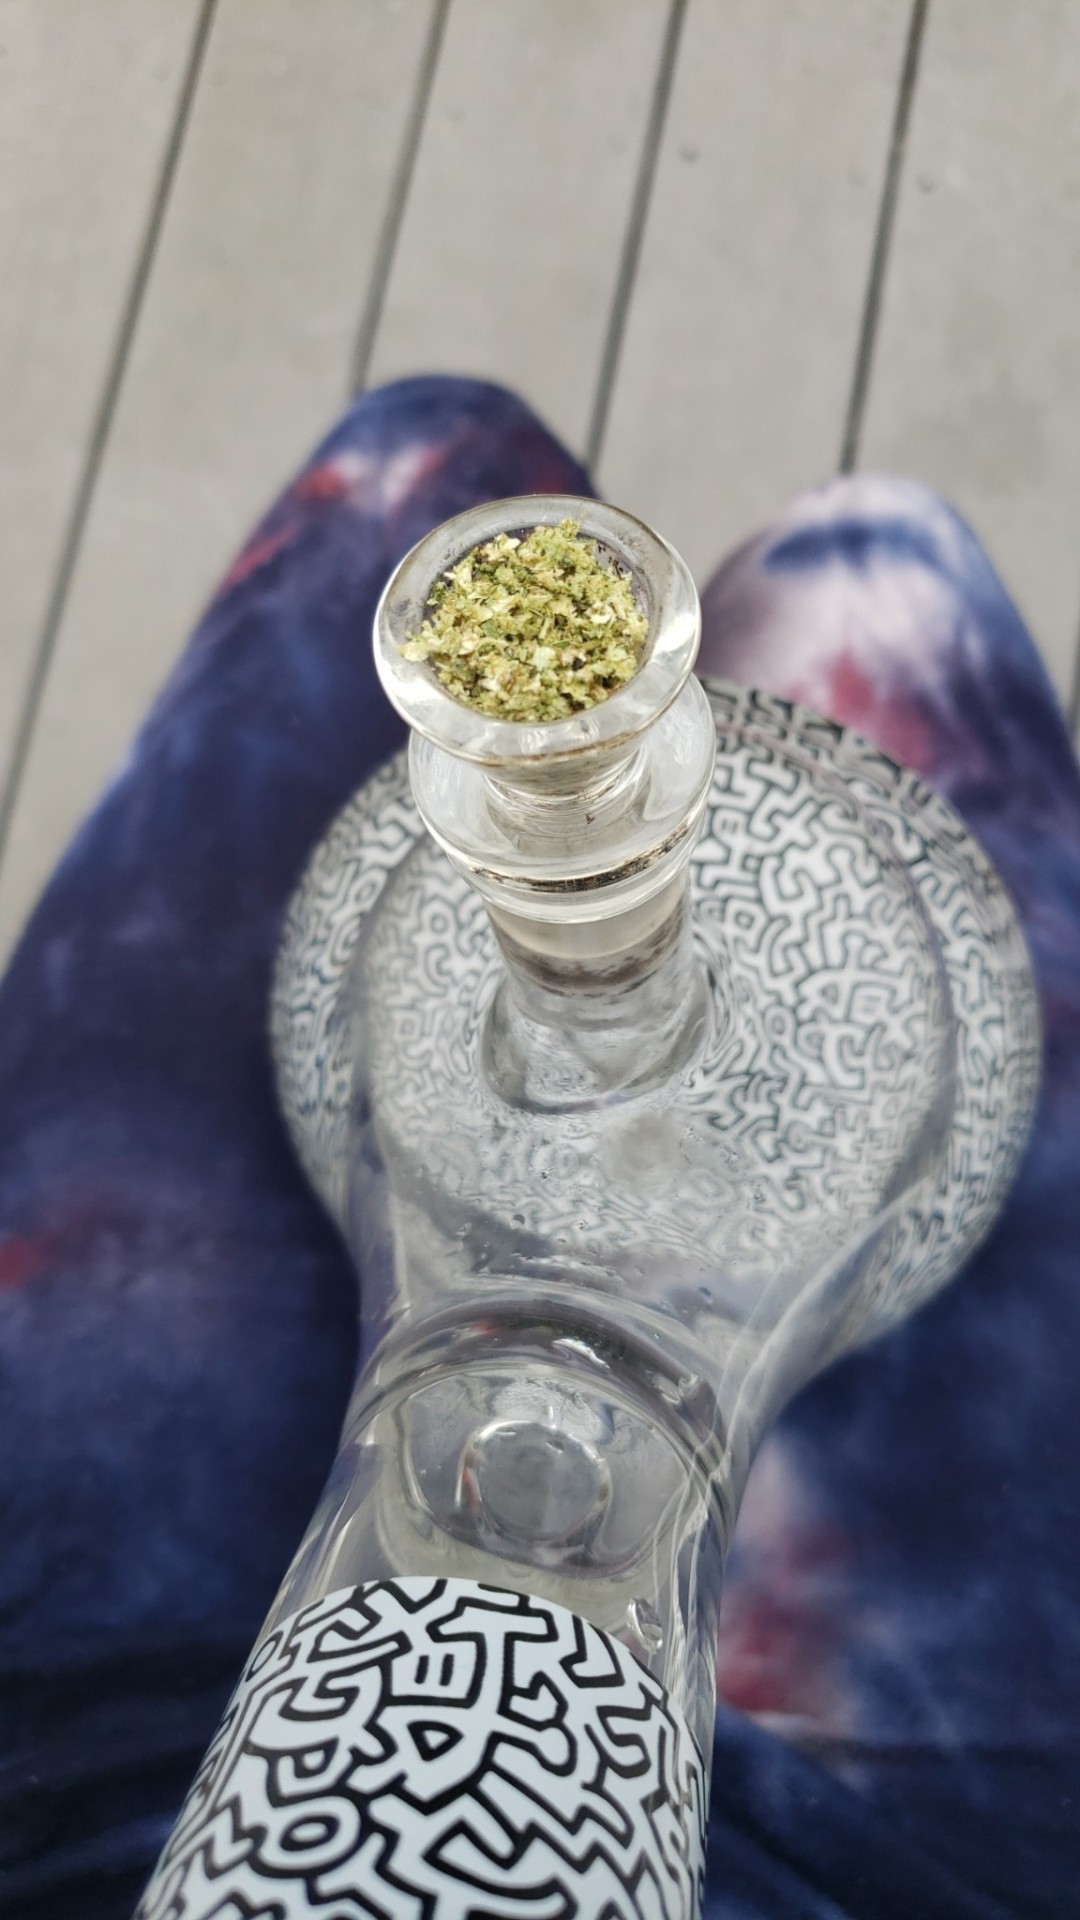 indica-illusions:My bongs so trippy to look at 👀